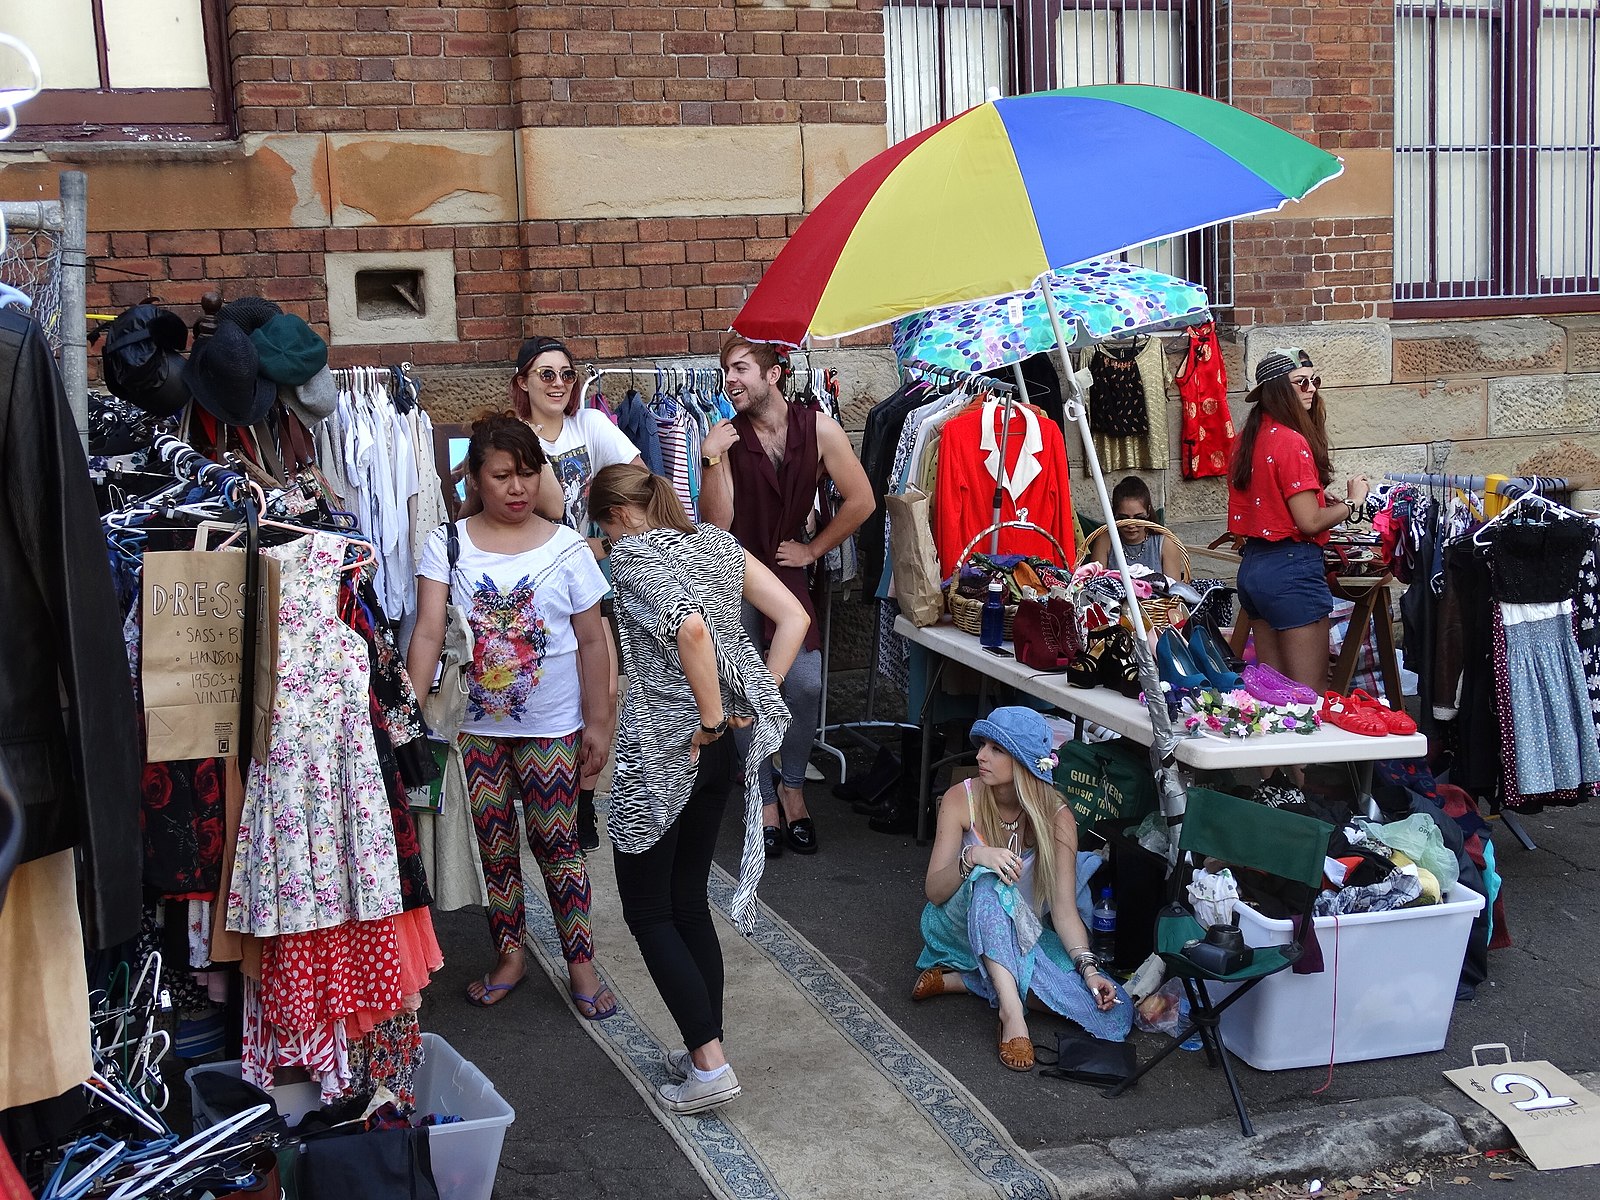 Glebe Markets on the hunt for new operator, locals shocked over potential closure